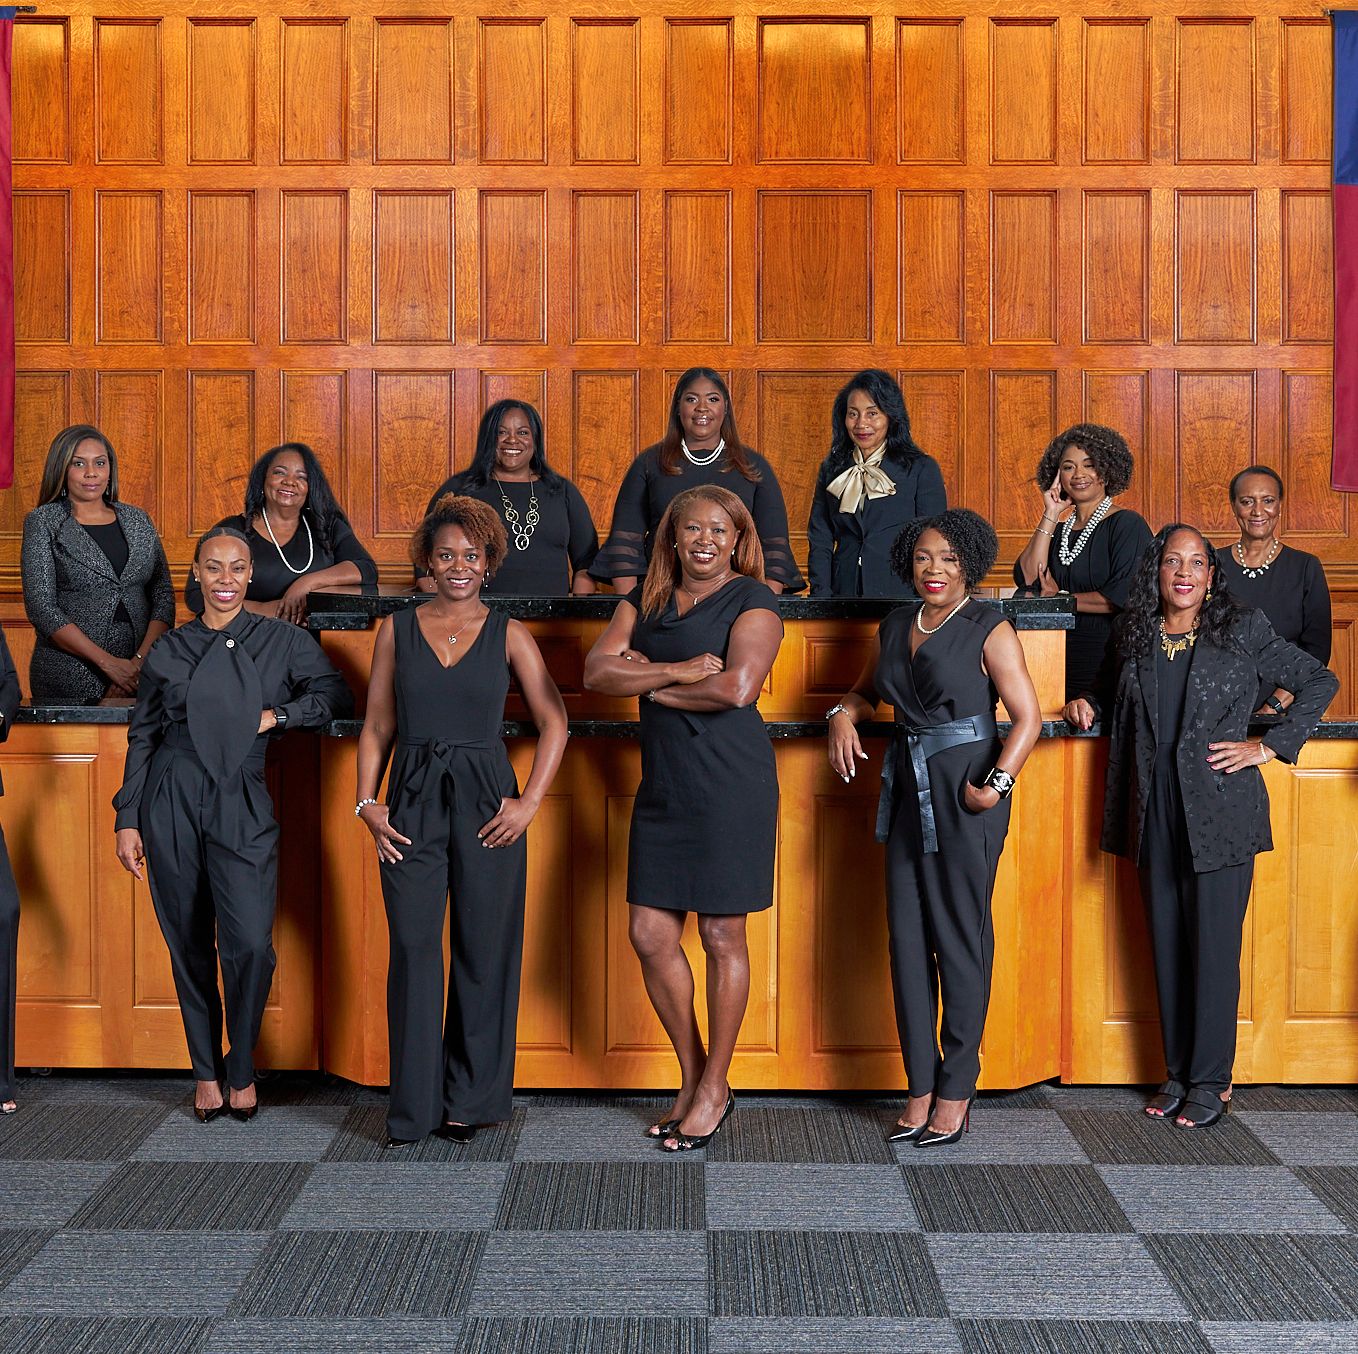 On a smothering hot summer day in 2018, 19 Texas women—all of them Black, all of them pillars in the legal community—got in formation for a photoshoot. Sharing knowing nods and confident smiles, they felt another very powerful figure in the room: Beyoncé was booming in the background.  <br><br>As the women looked into the camera, they were also looking toward a groundbreaking future. Each was campaigning for a different judgeship in Harris County, one of the most racially and ethnically diverse areas in Houston. Many had been friends for years, but making history as the largest group of Black women elected to judicial seats in Harris County could surely bond them forever.  <br><br>Not long after the photo was taken, every single one of them won their races. The victory made national headlines and cemented their legacy in judicial history. 